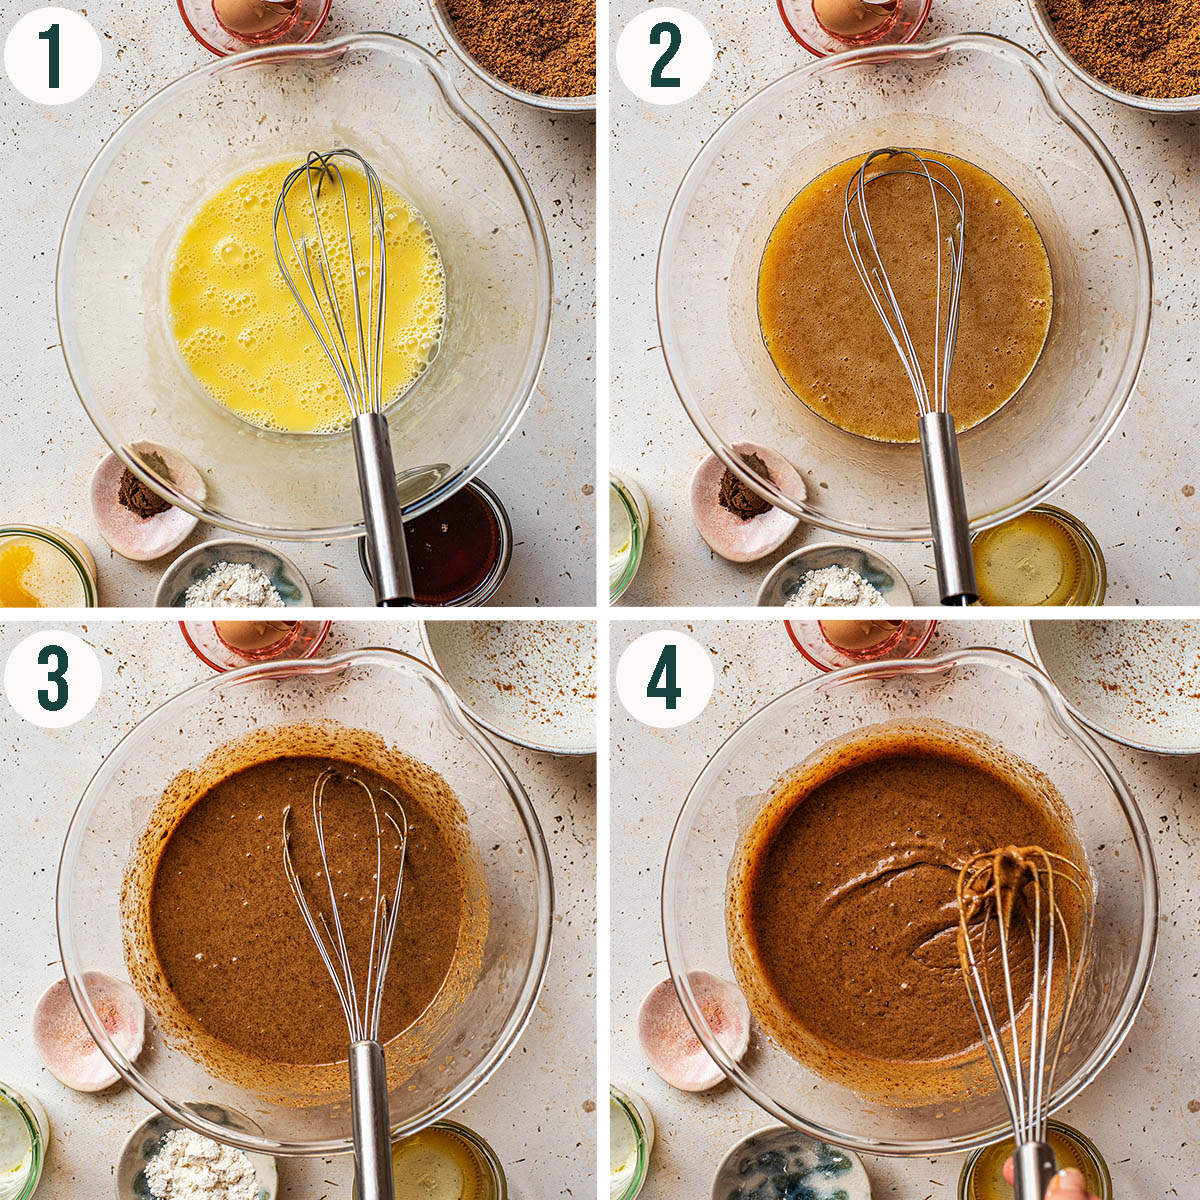 Butter tart filling steps 1 to 4, adding ingredients and whisking to mix.